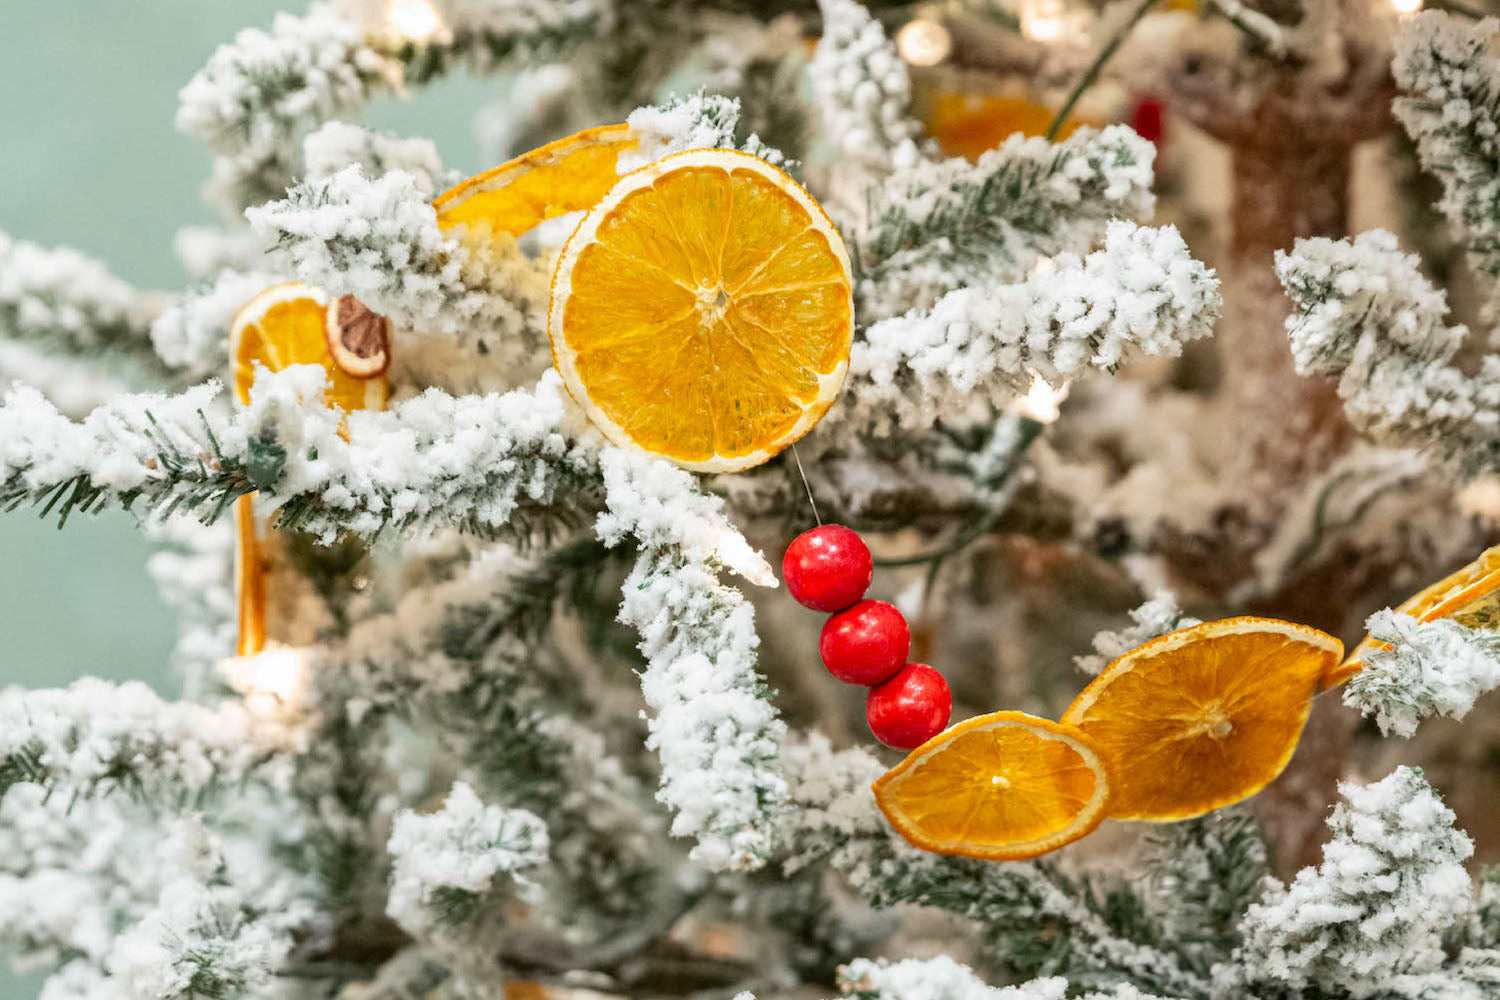 How to Make a Citrus Garland for the Holidays